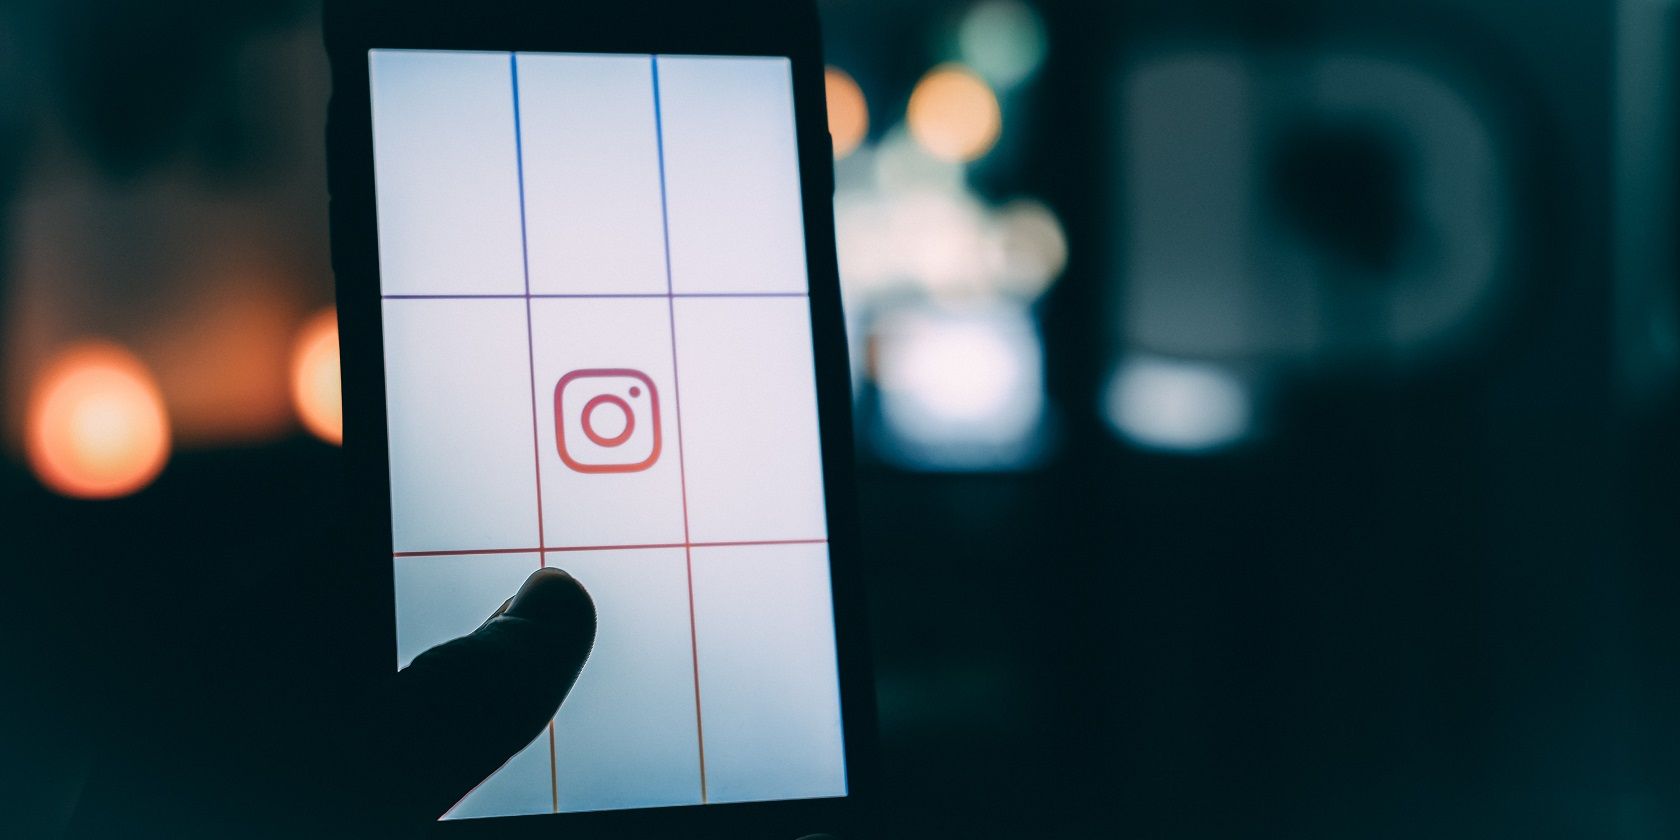 How to Make Your Instagram More Private: 8 Useful Tips